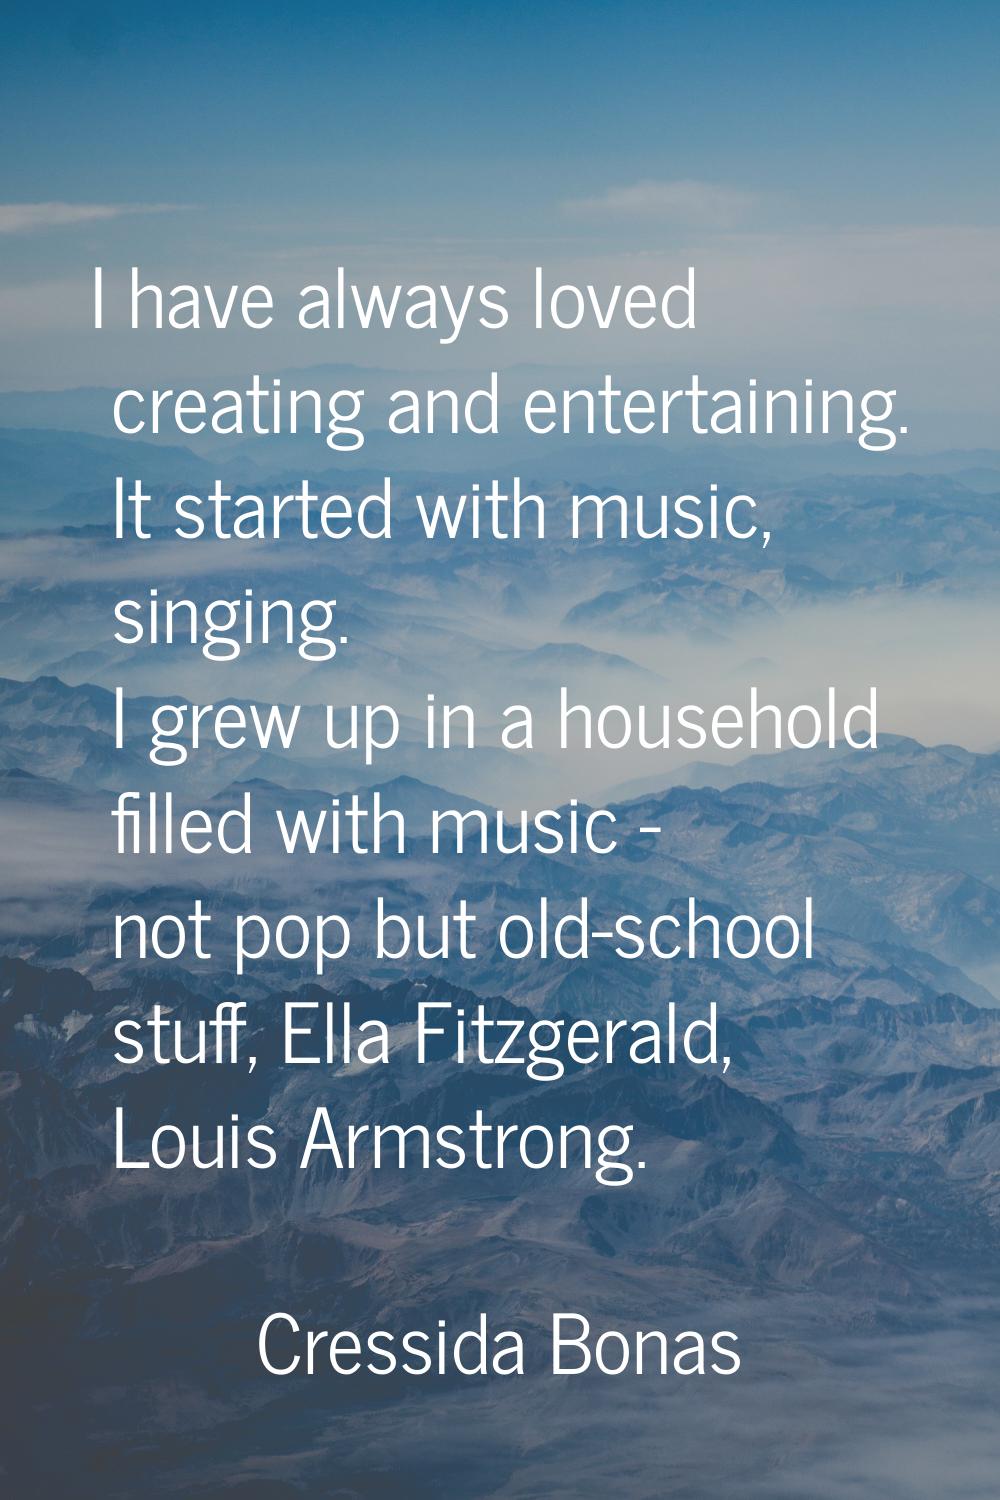 I have always loved creating and entertaining. It started with music, singing. I grew up in a house